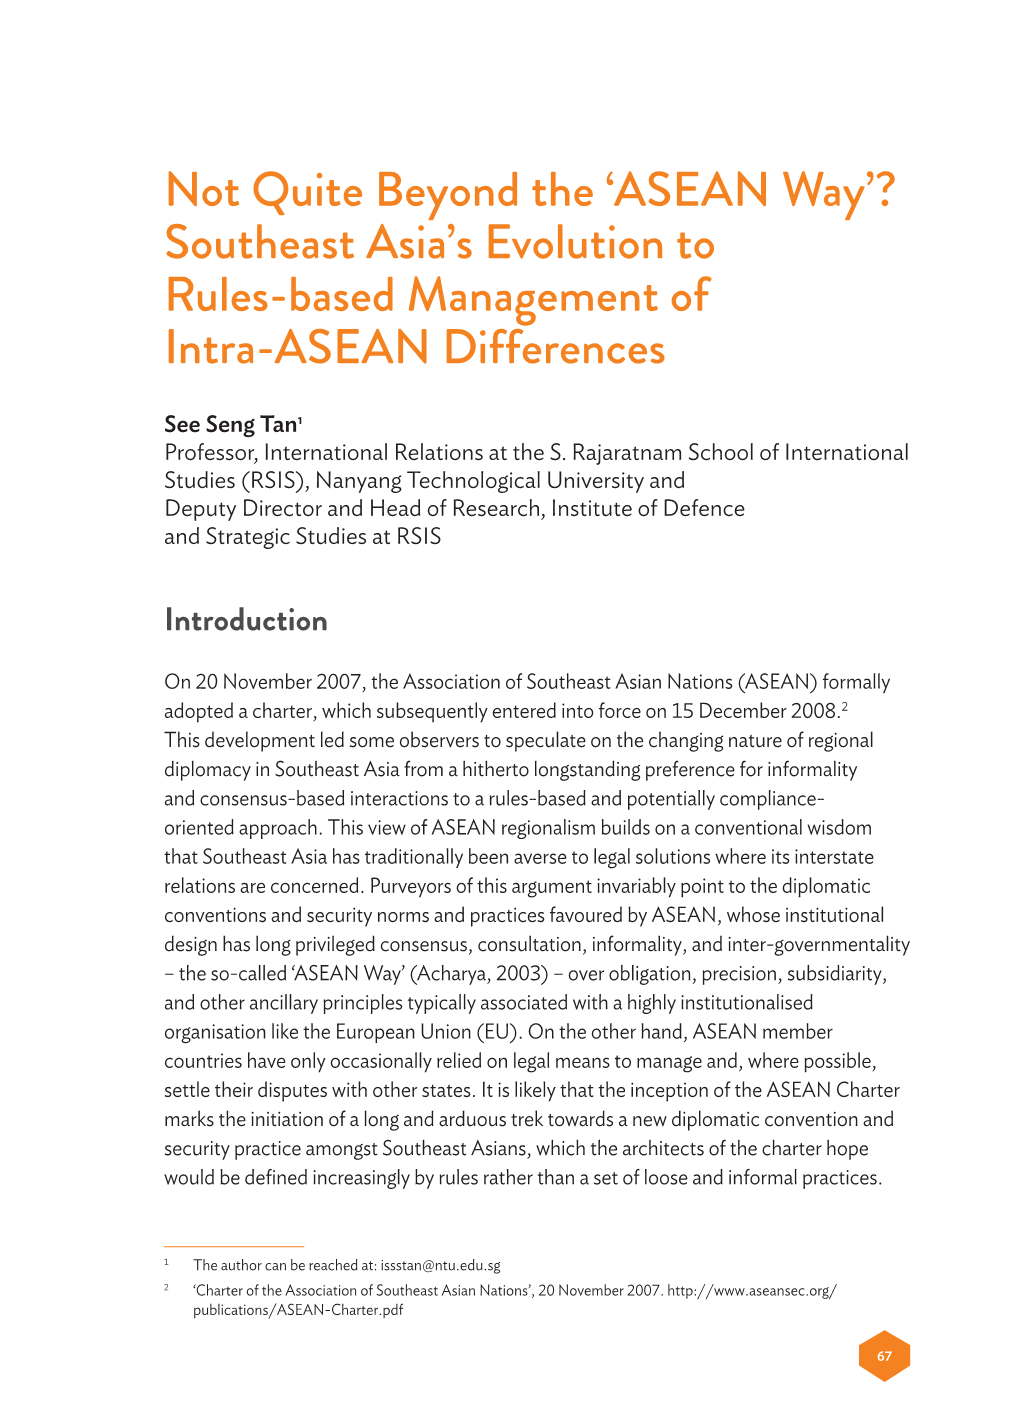 Not Quite Beyond the 'ASEAN Way'? Southeast Asia's Evolution to Rules